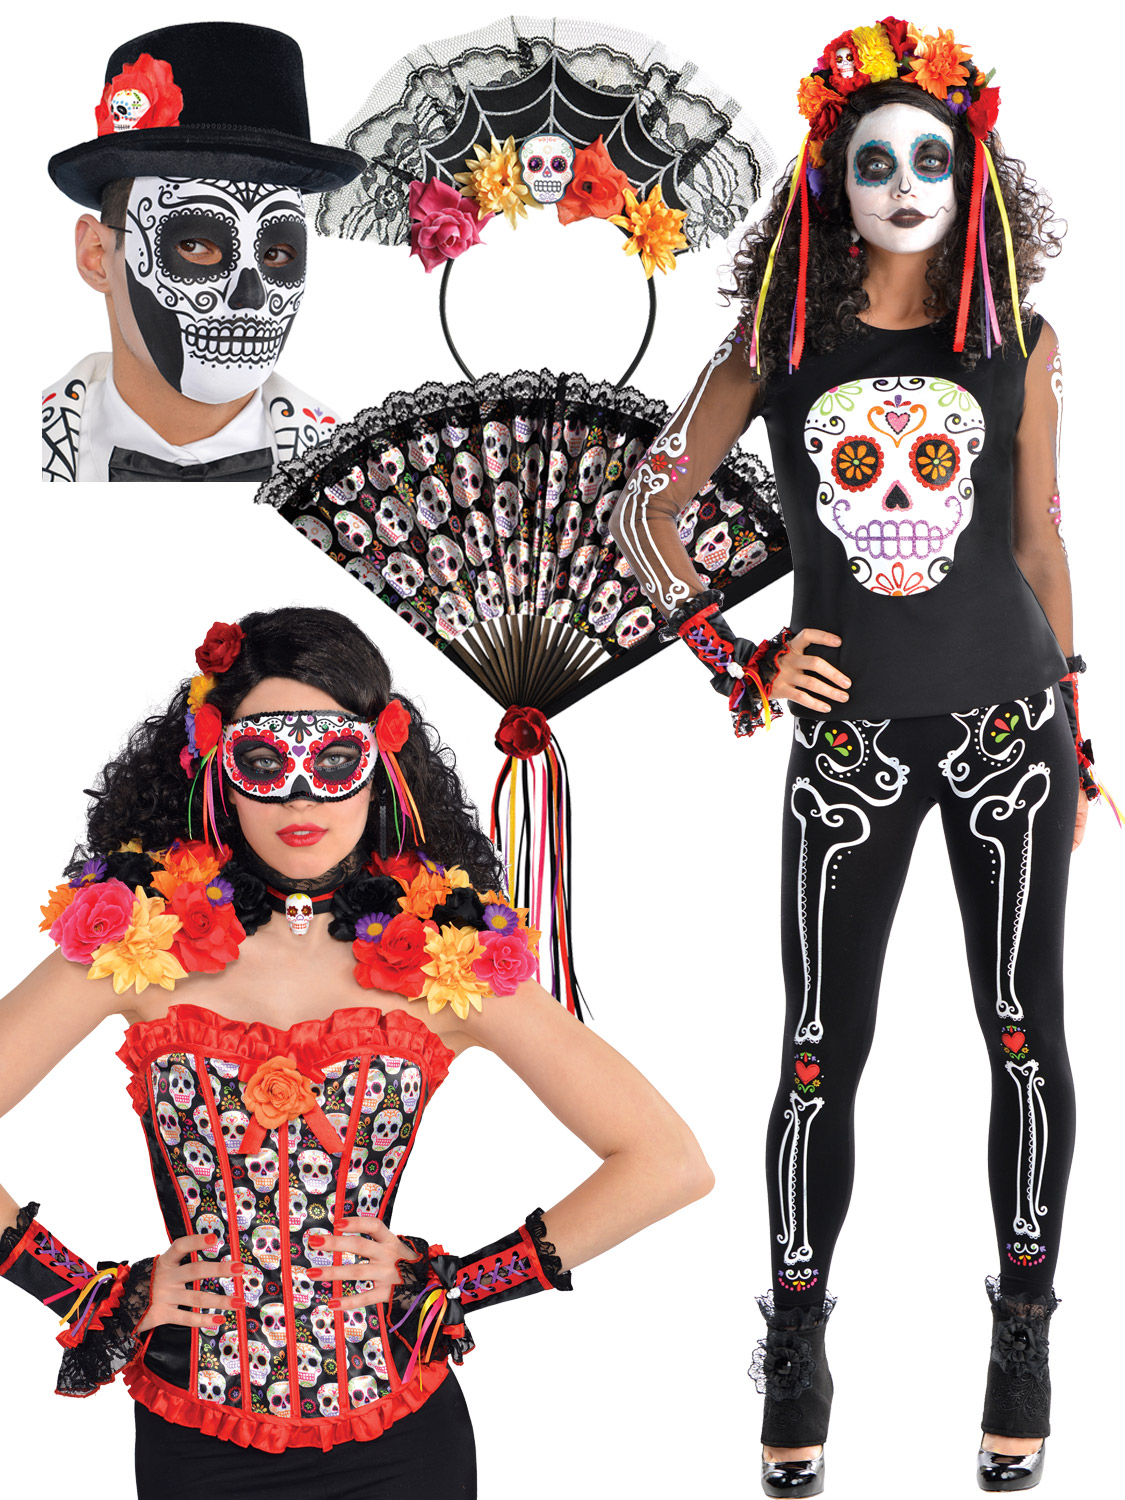 10 Fabulous Day Of The Dead Dress Ideas day of the dead shirt all accessories fancy dress hub 1 2022